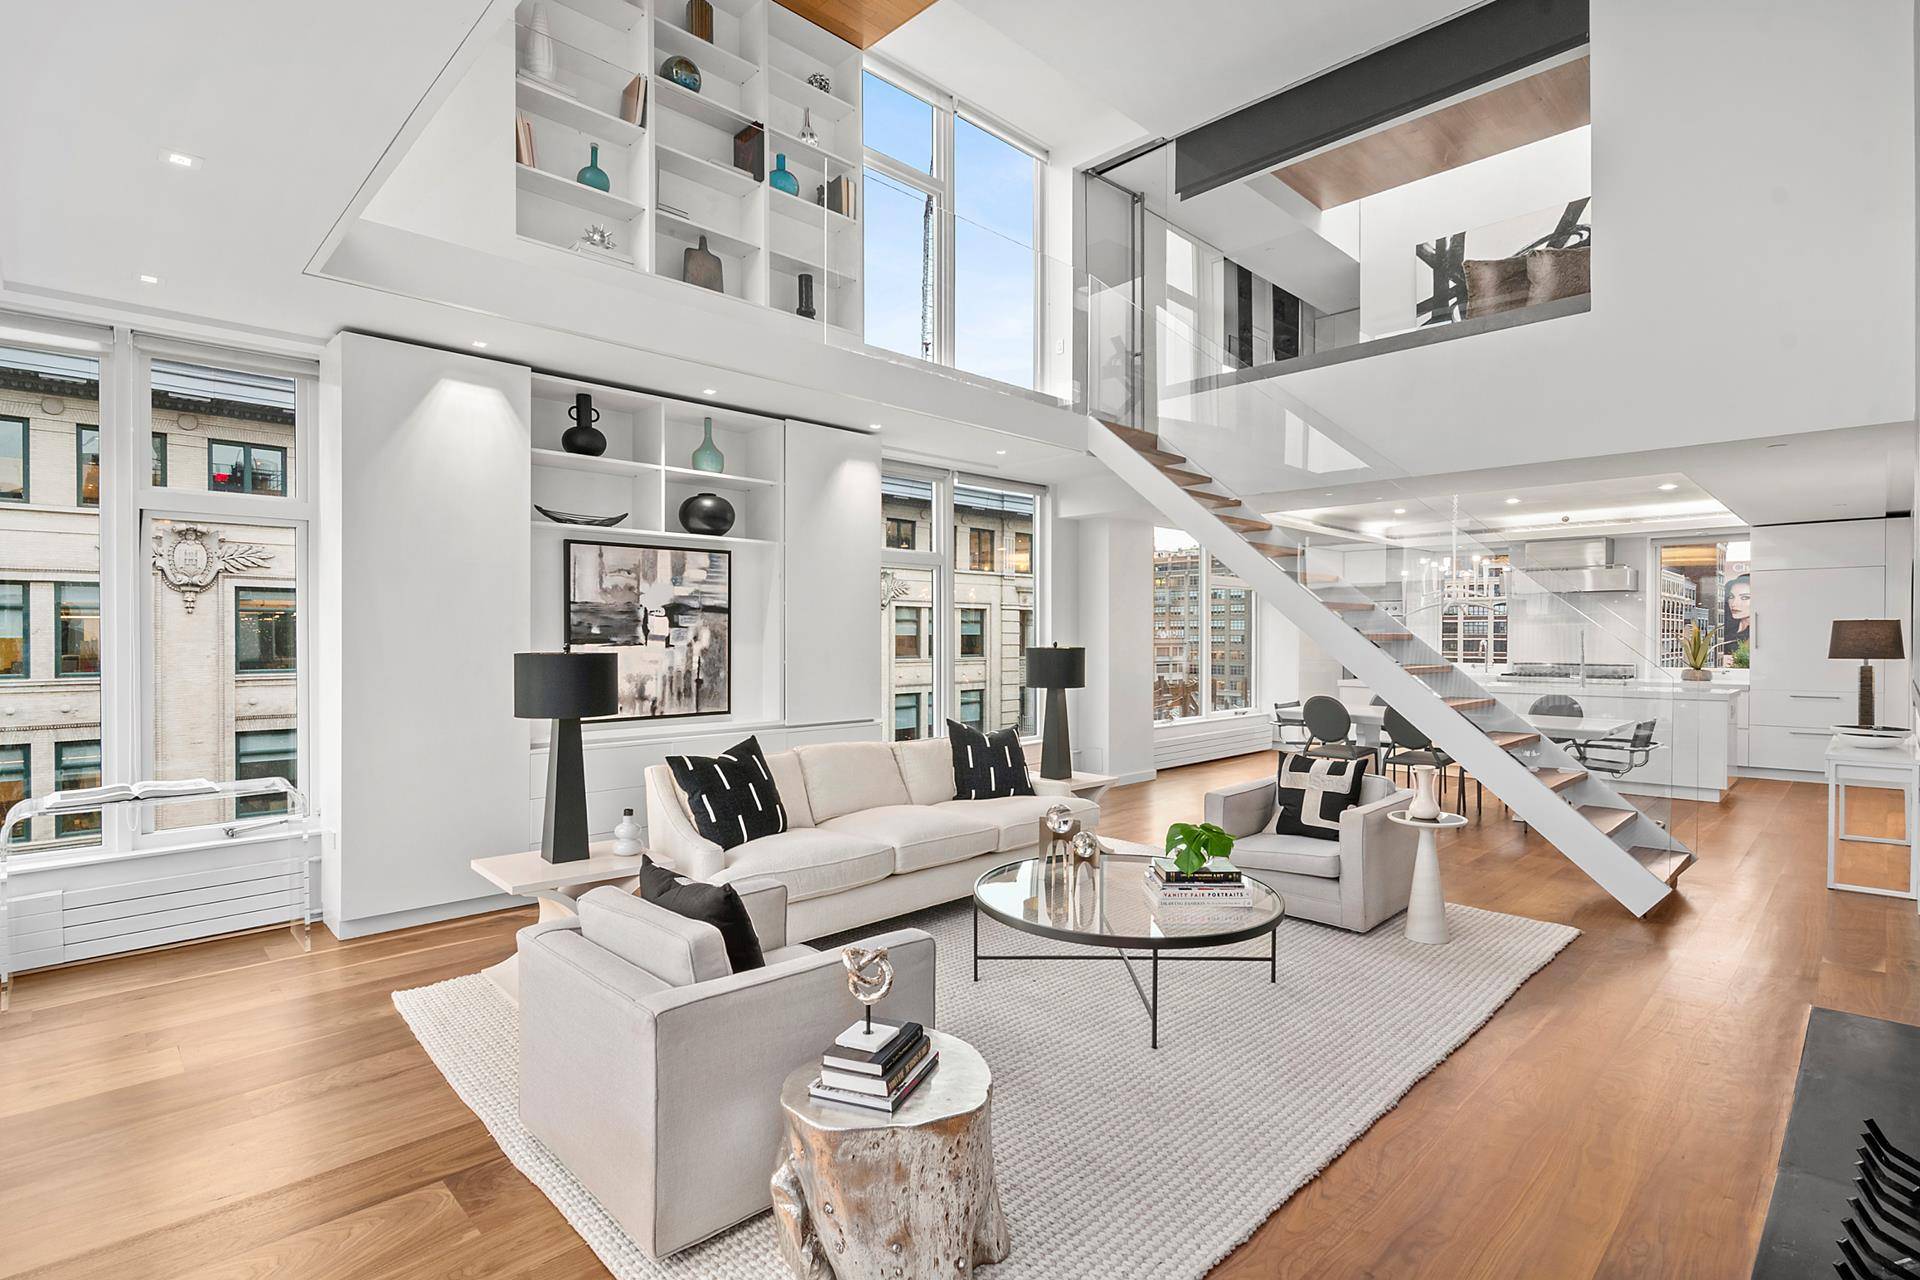 Meticulously crafted by by Staz Zakrzewksi AIA, Z H architects, this extraordinary penthouse atop boutique condominium 304 Spring Street, New York, NY 10013 is newly updated updated for your maximum ...